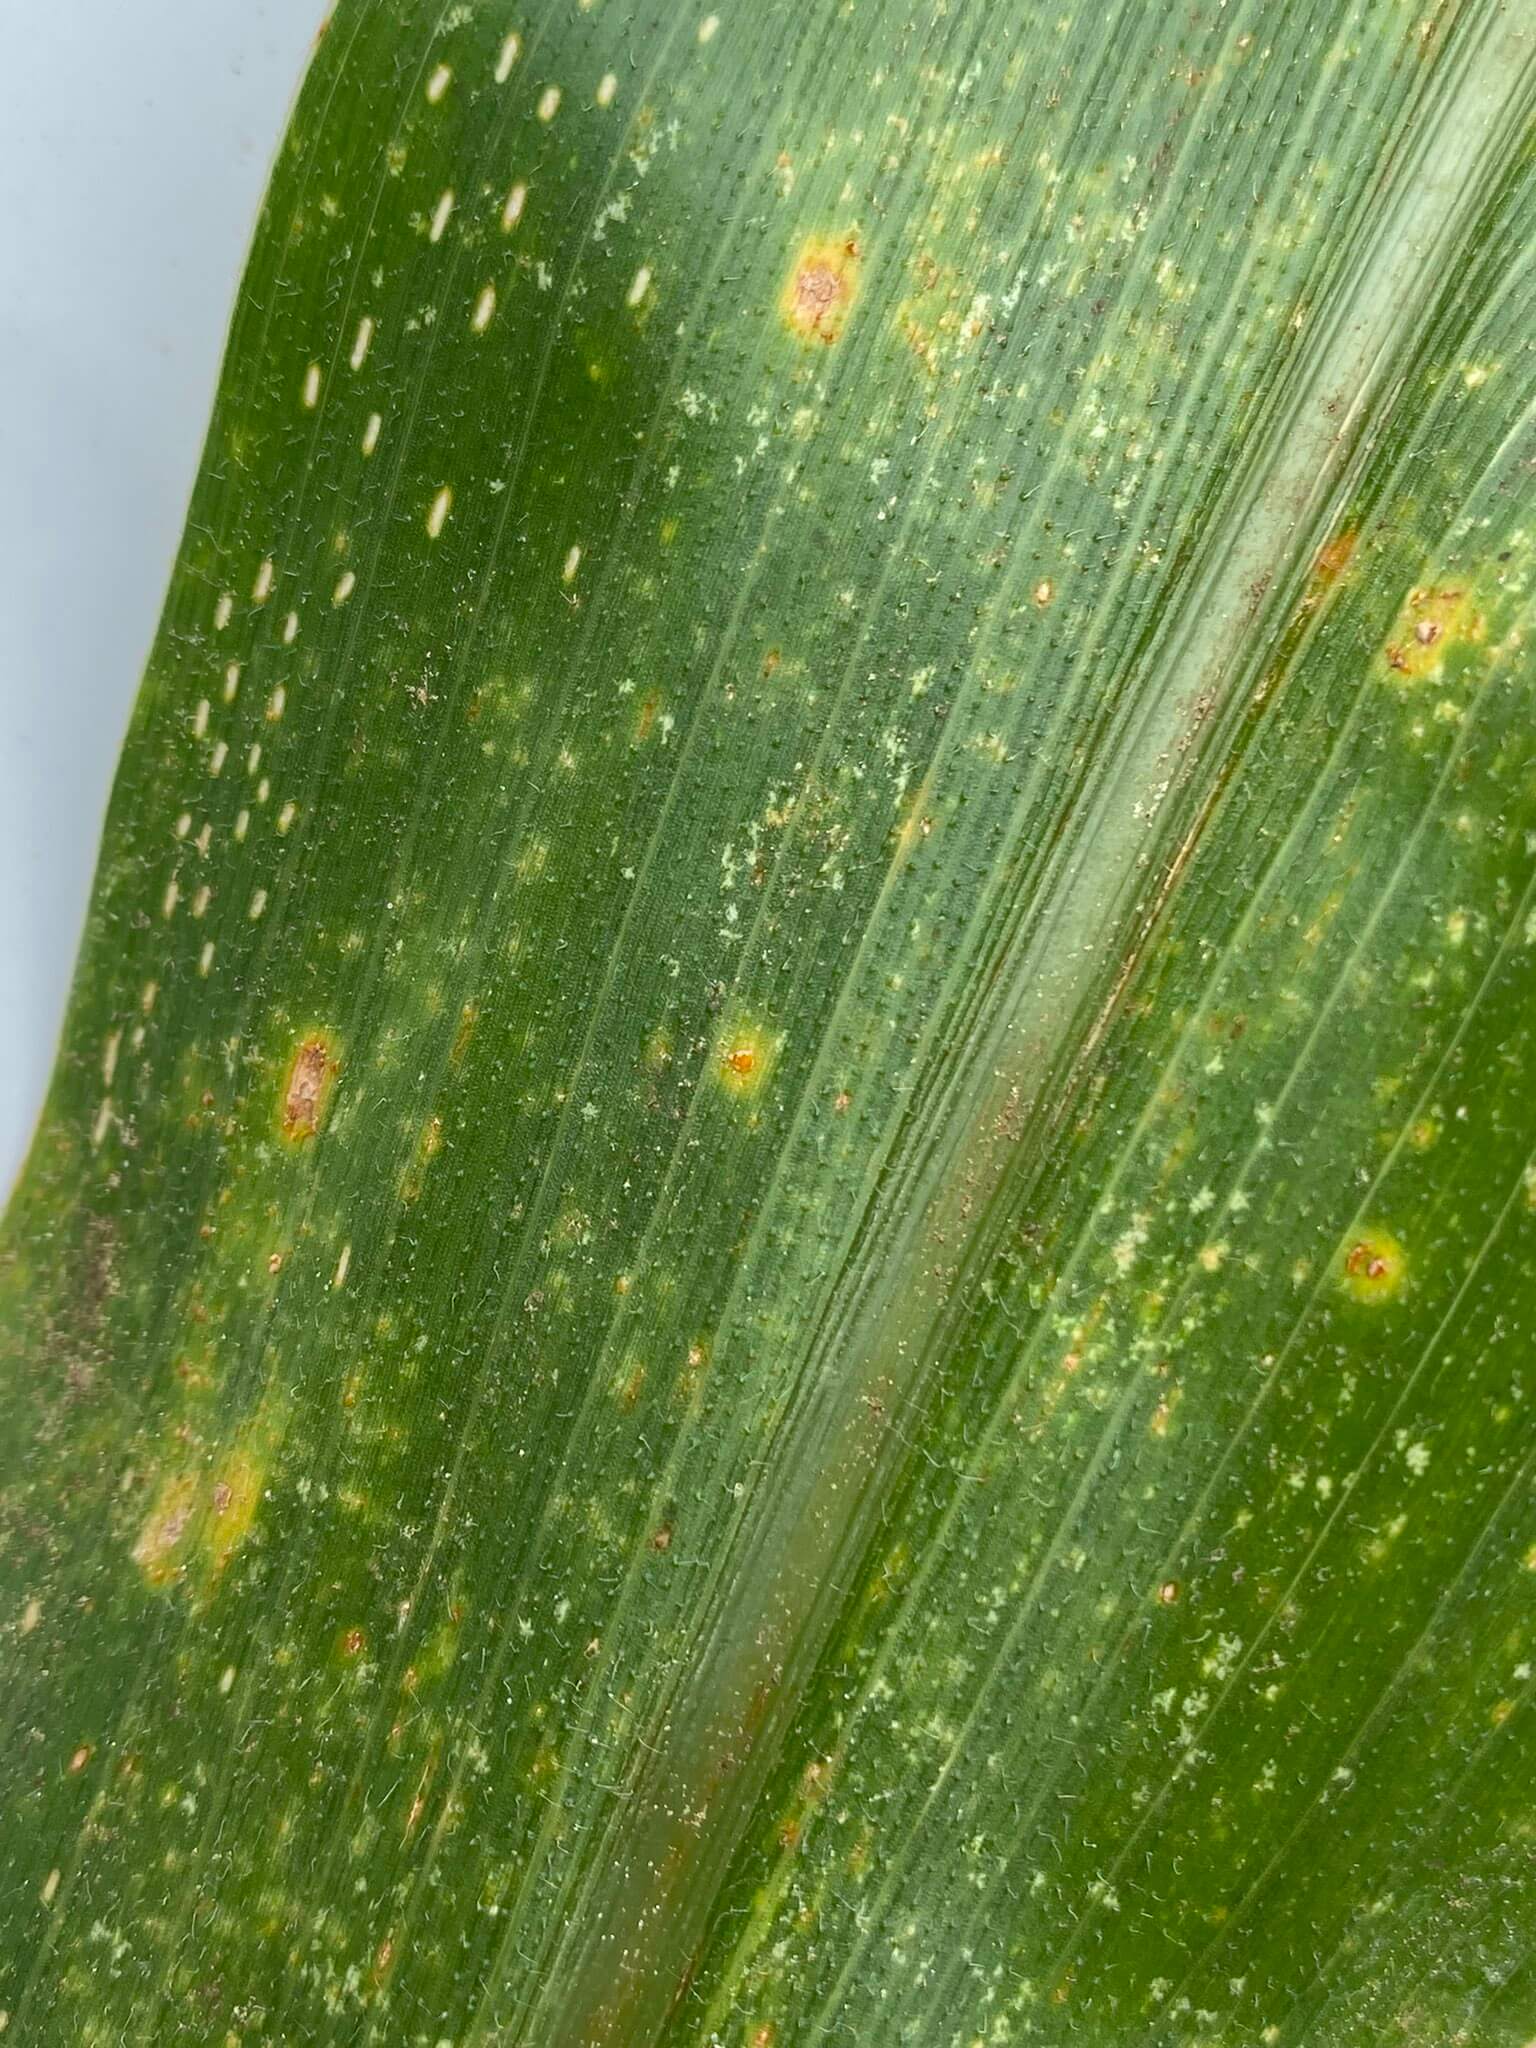 Orange spores emerging from southern rust pustules on a corn leaf.